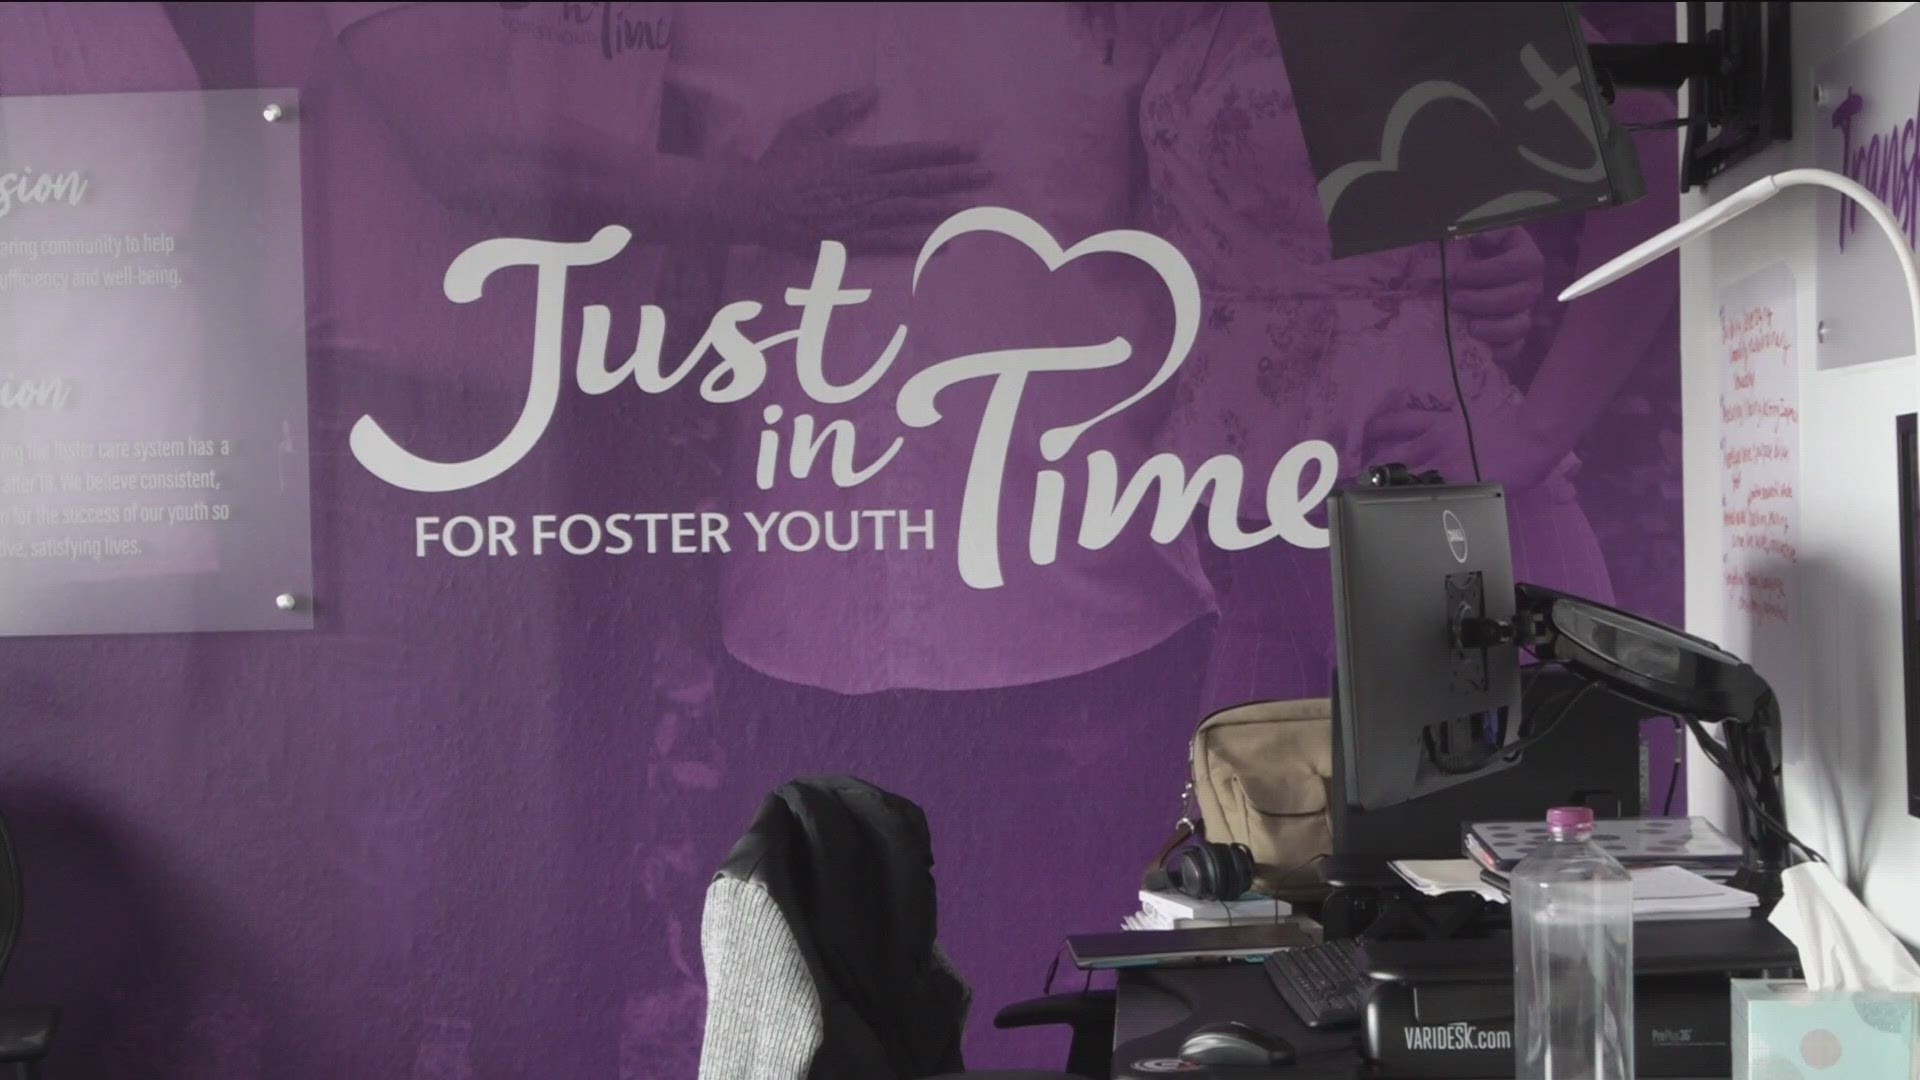 Just In Time For Foster Youth is for people between the ages of 18 and 27, helping former foster kids in the system become self-sufficient adults.